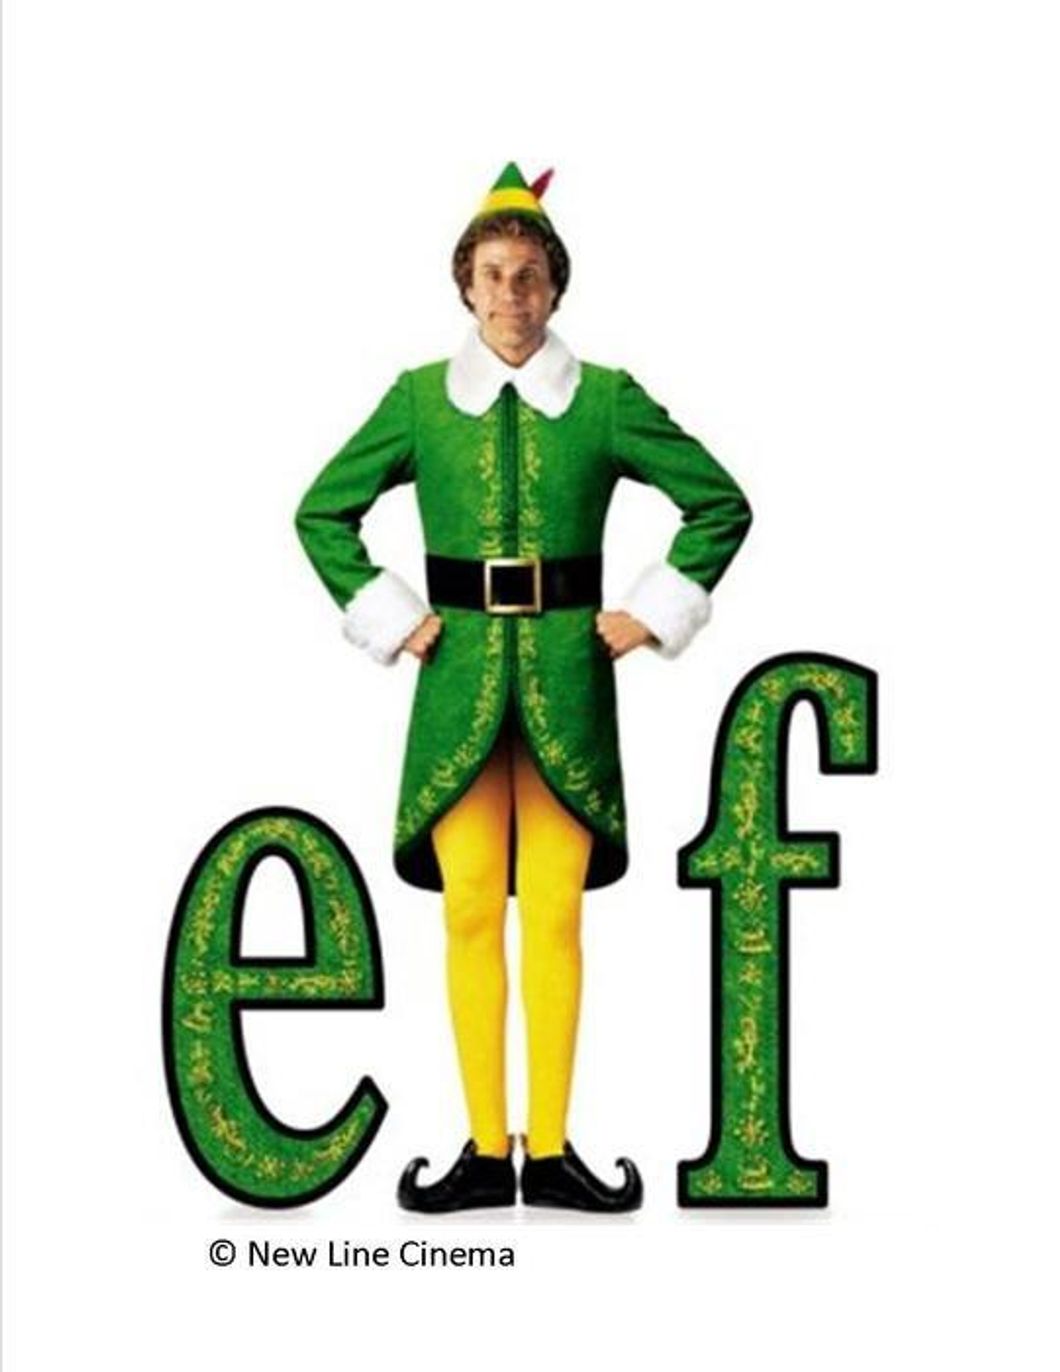 Quotes From The Movie Elf To Get You In The Christmas Spirit